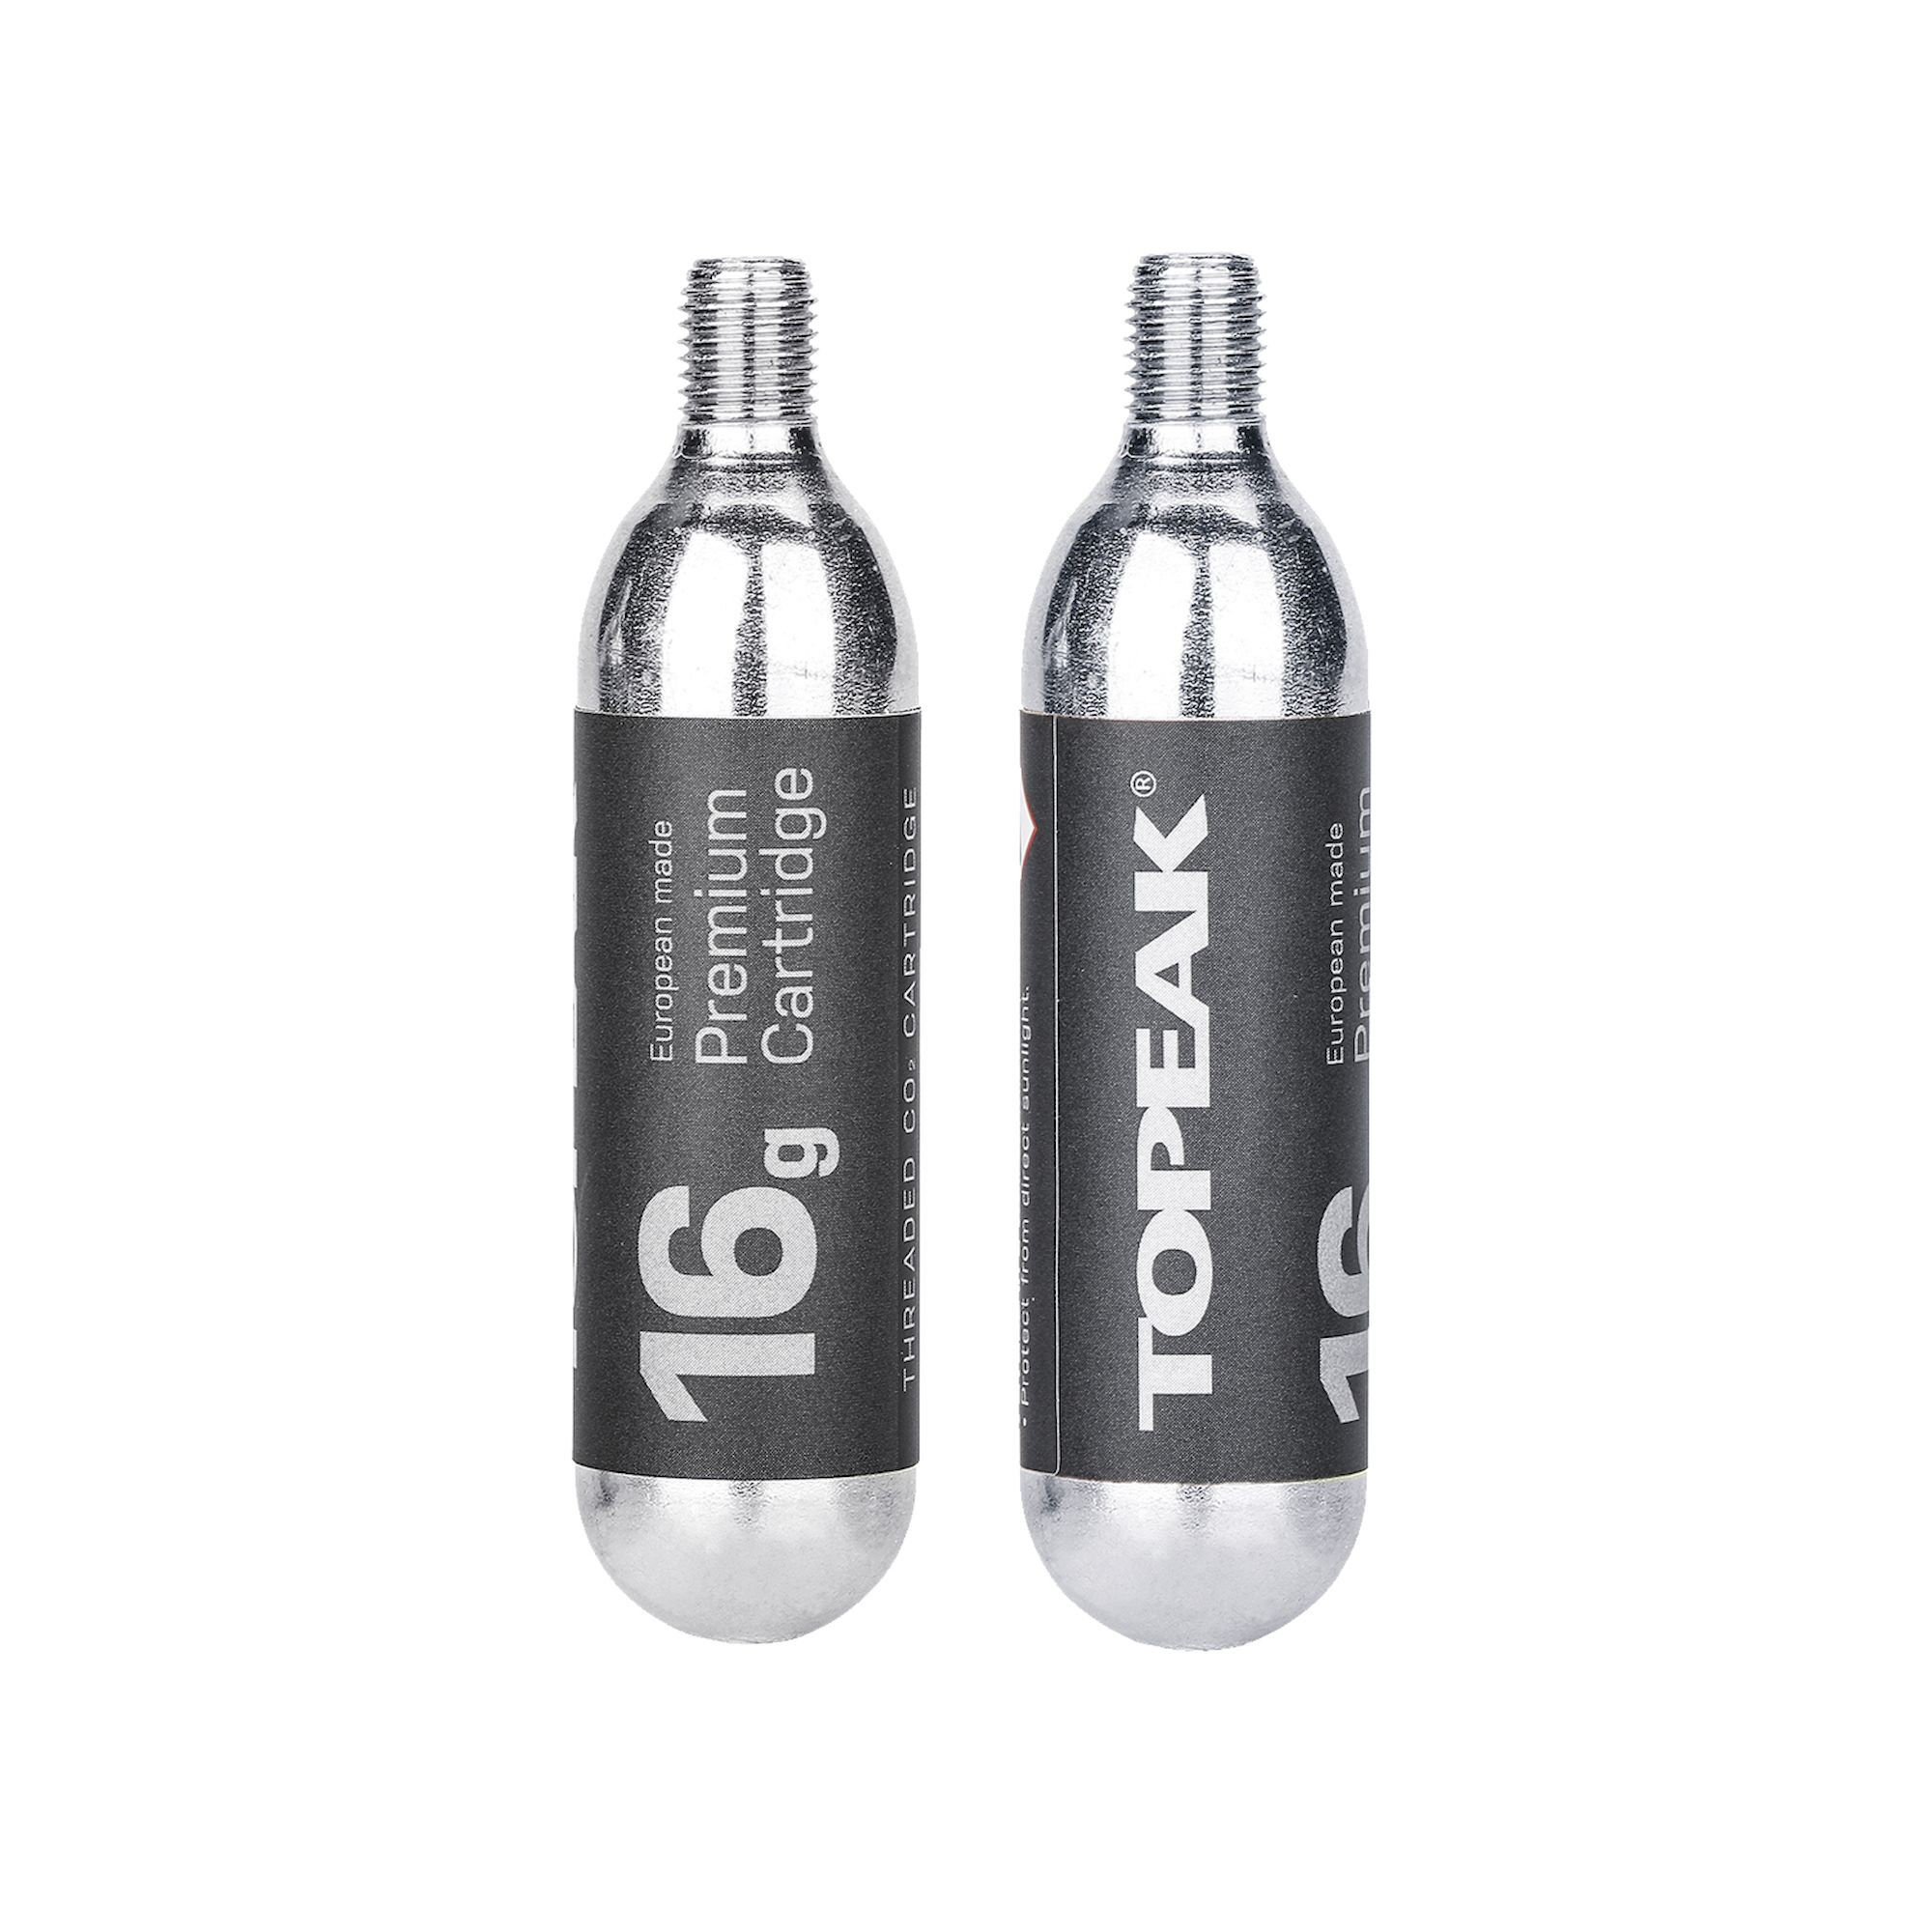 Topeak CO2 Cartridge 16g Threated (2 pieces) - Pompa a CO2 | Hardloop